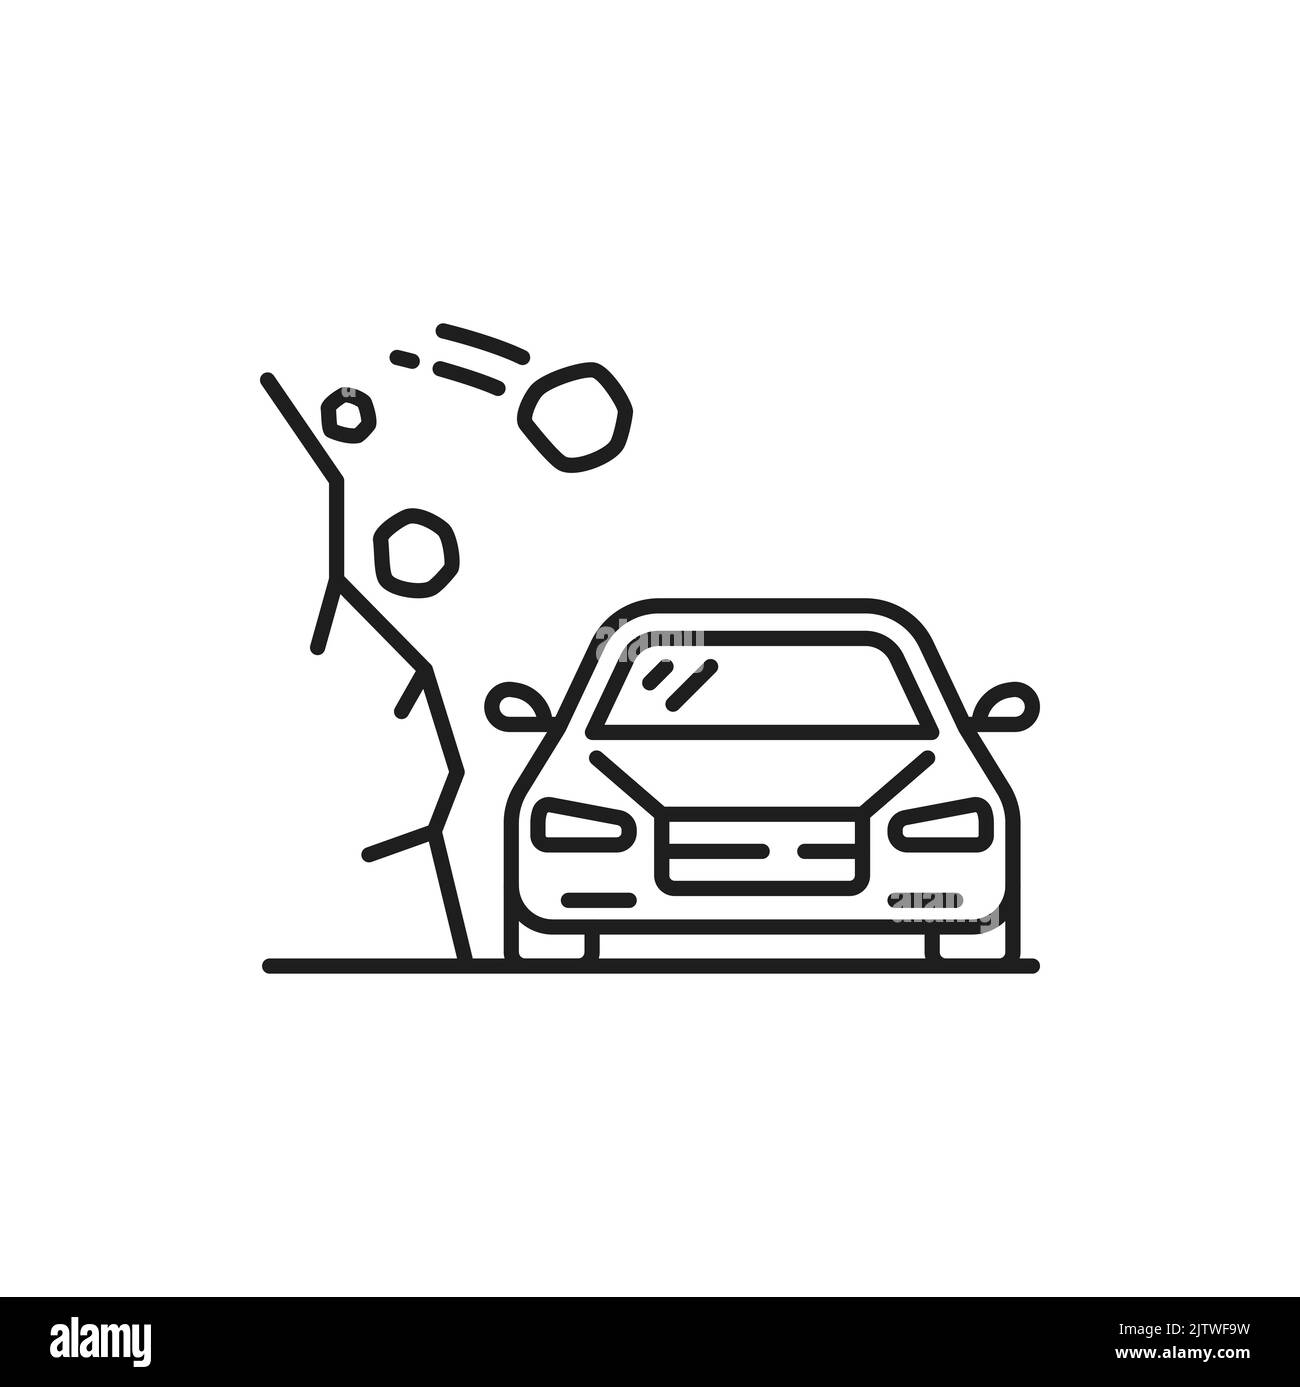 Car damage in rock fall line icon. Car collision, vehicle damage in earthquake natural disaster outline vector sign, automobile insurance risk line pictogram with stones falling from cliff on car Stock Vector